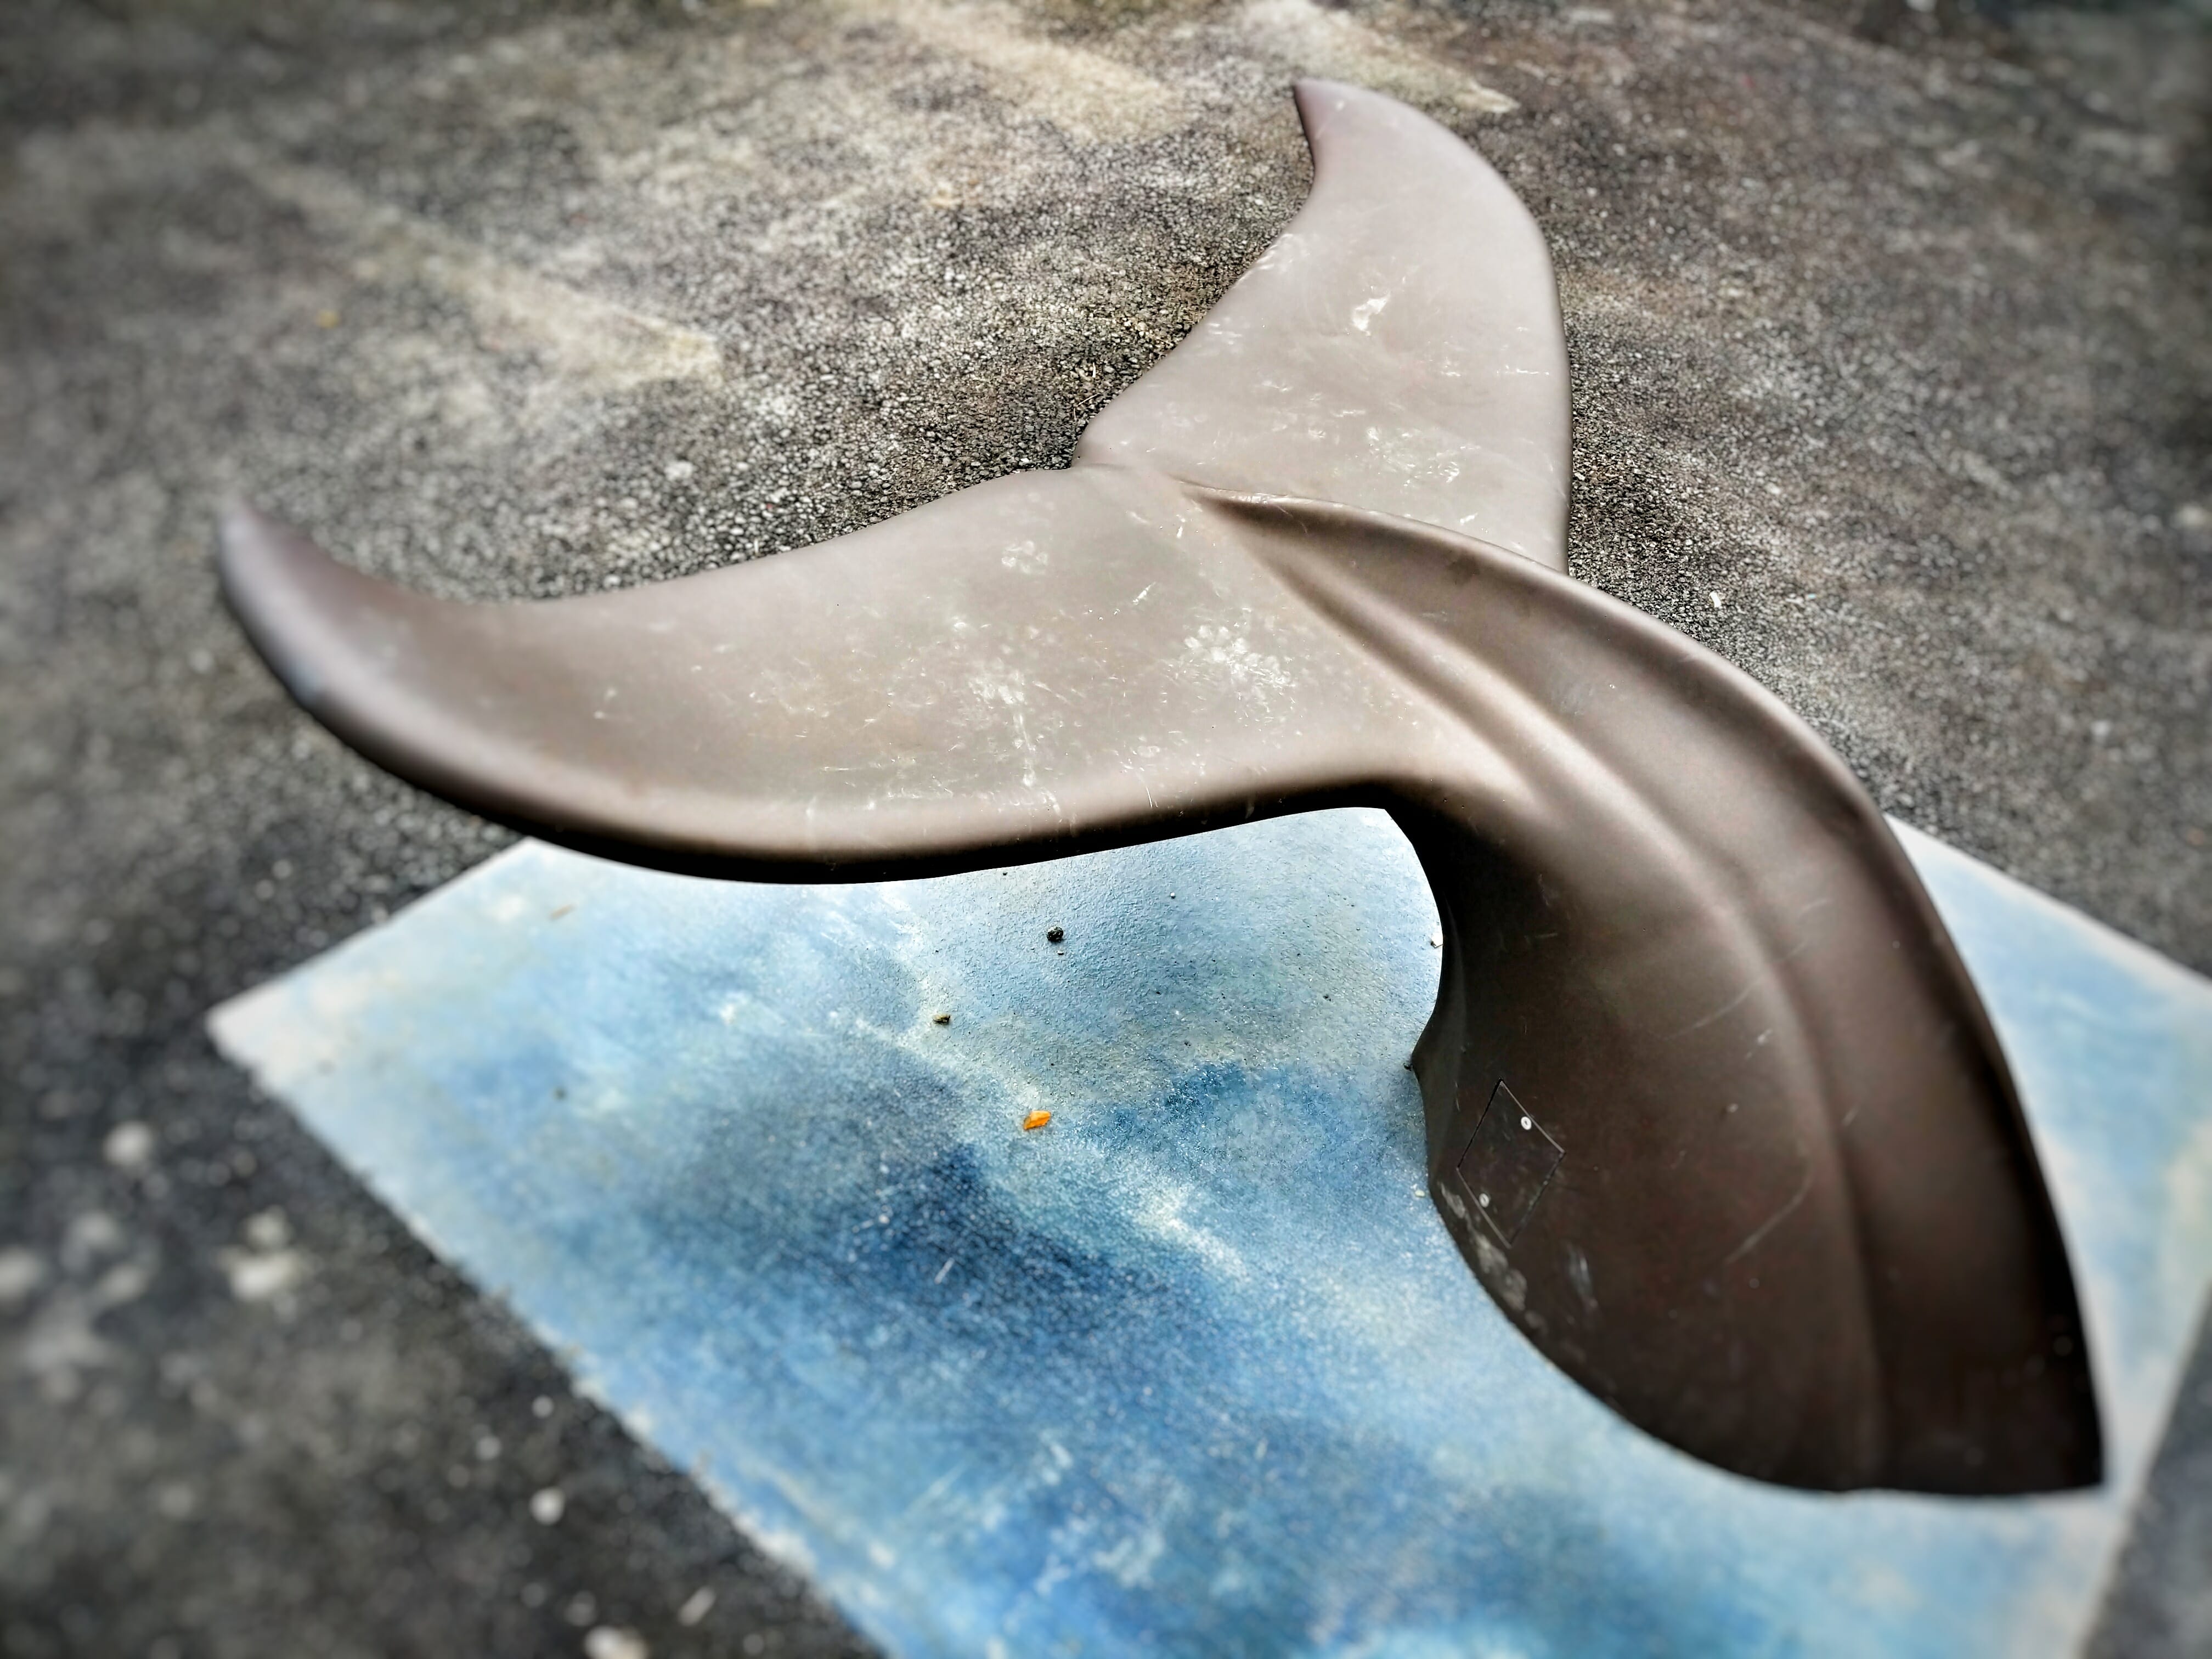 Whale Tail bench at Overstreet Park